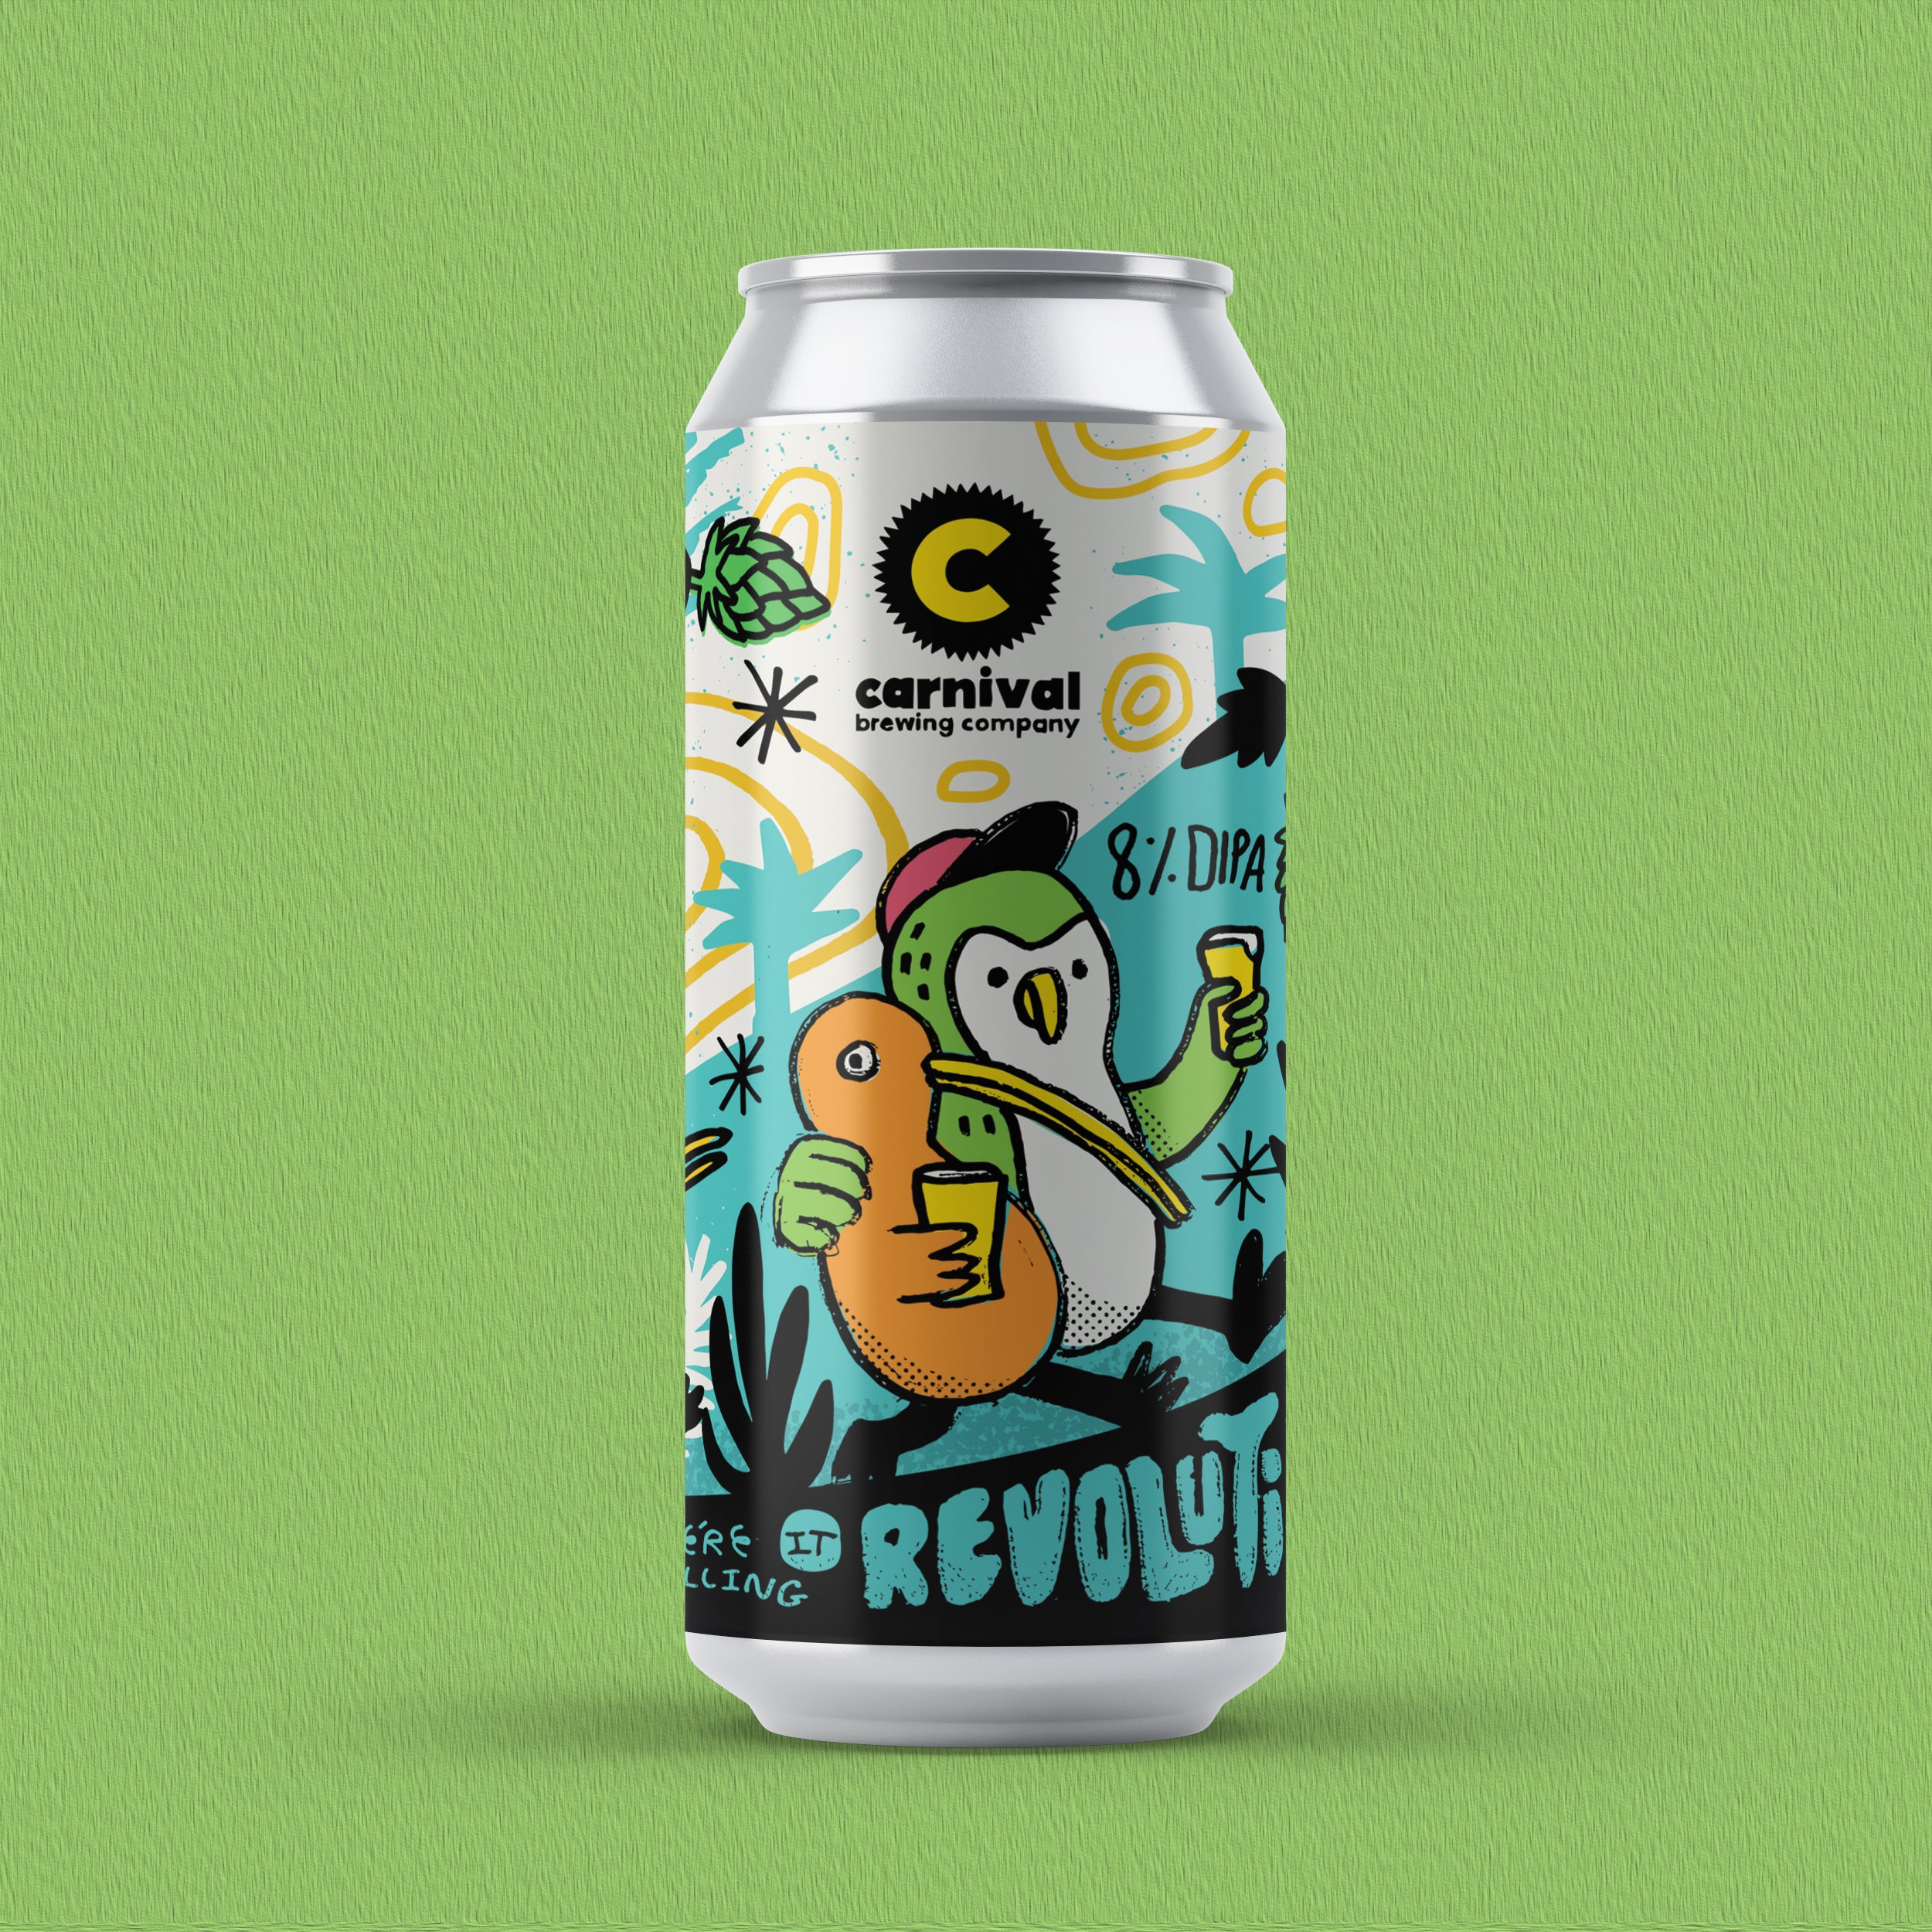 We're Calling it Revolution - NZ DIPA (8%) - SPECIAL MULTIPACK OFFER